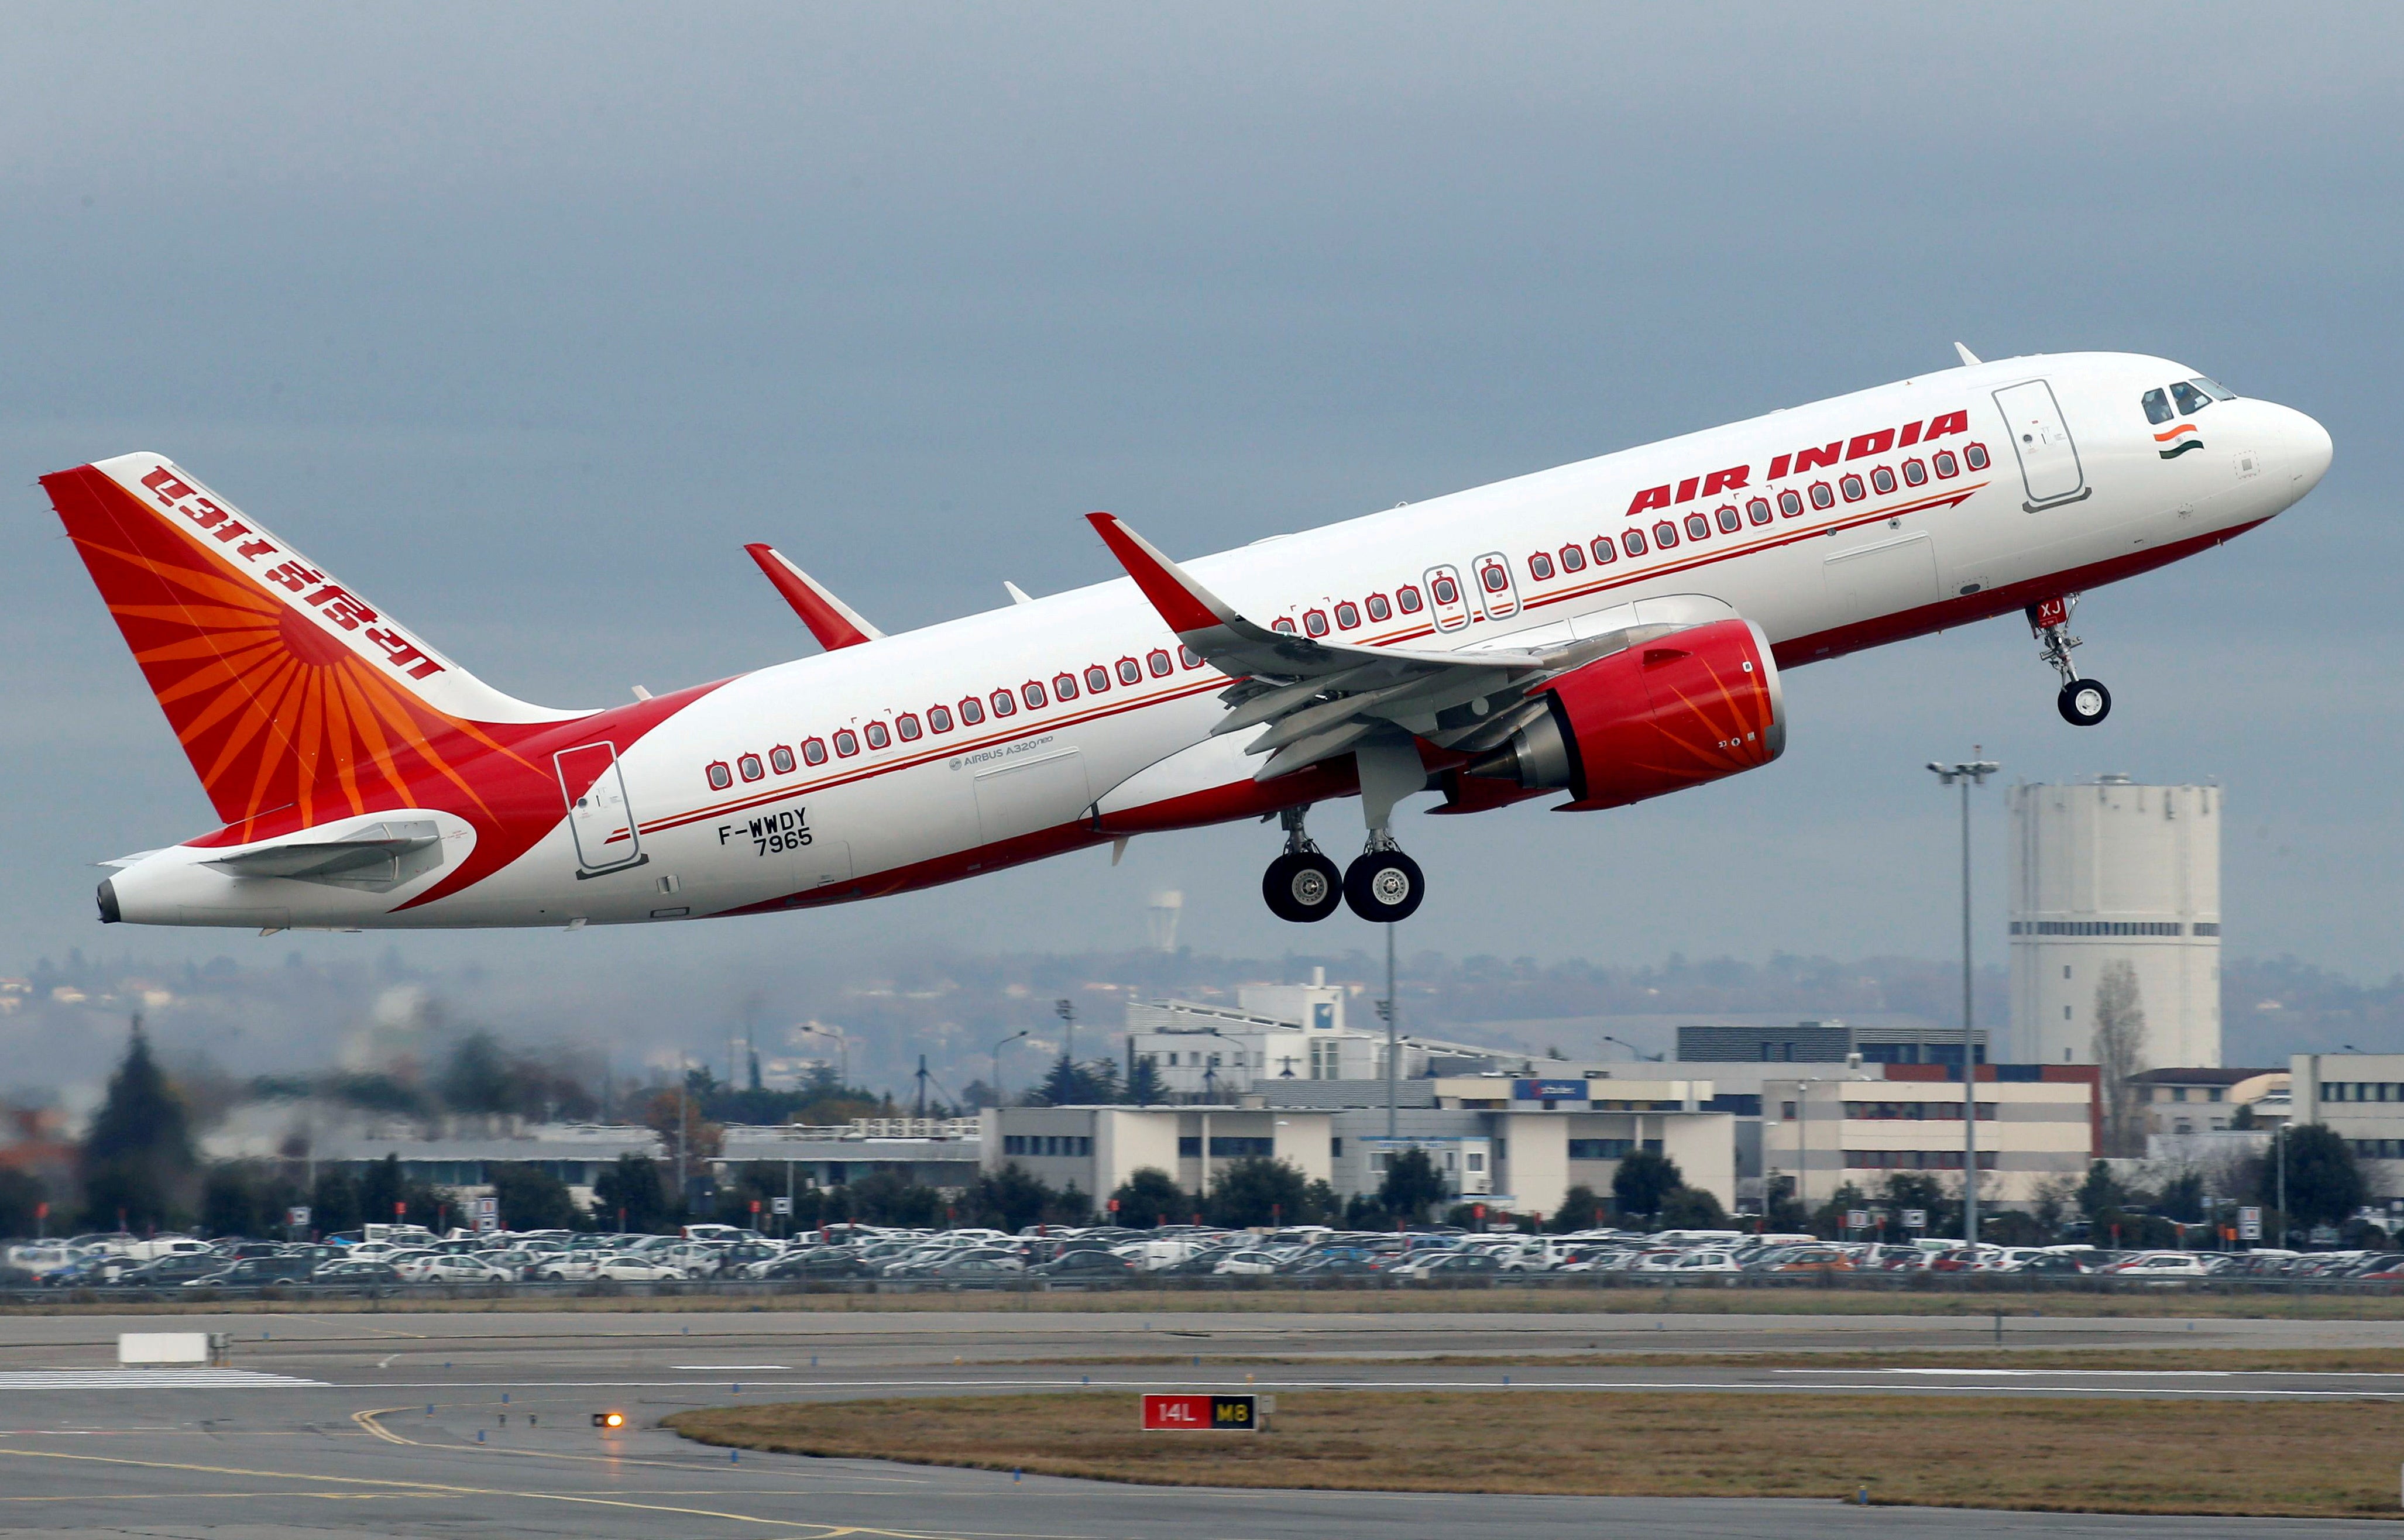 Air India was founded in 1932 as Tata Airlines by JRD Tata, and was nationalised in 1950s